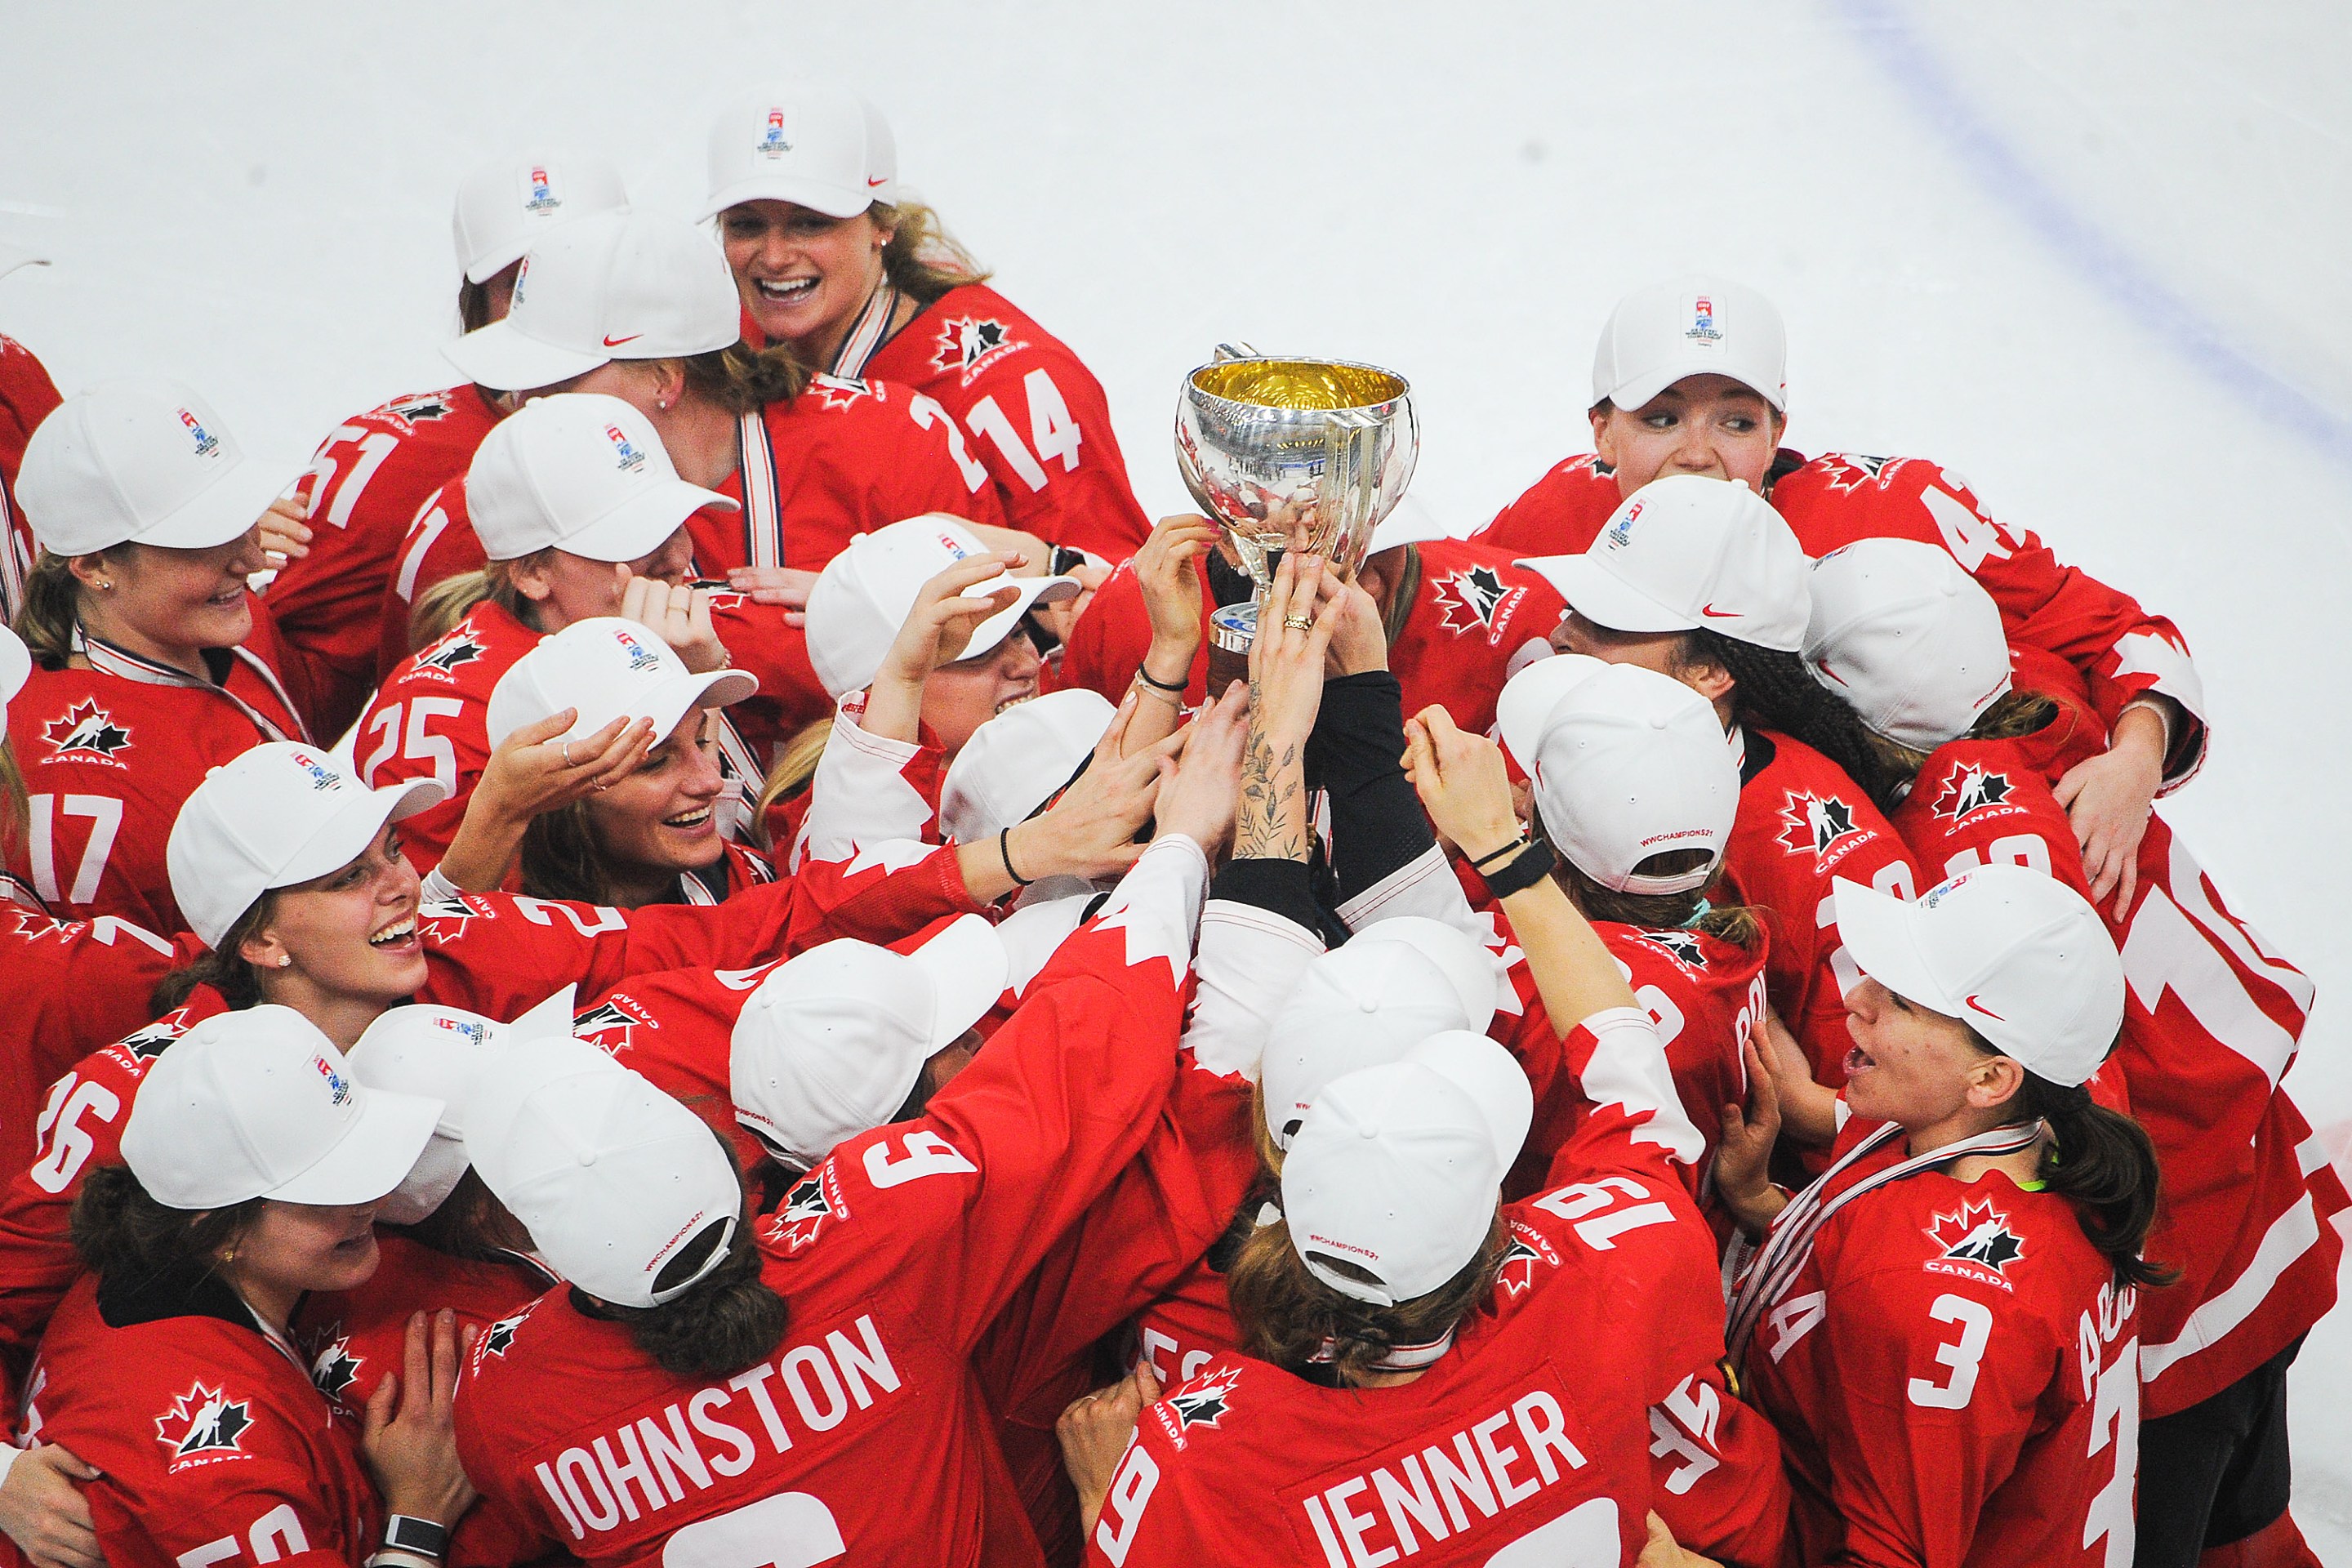 Team Canada hoists the championship trophy after their victory over United Sates in the 2021 IIHF Women's World Championship gold medal game played at WinSport Arena on August 31, 2021 in Calgary, Canada.